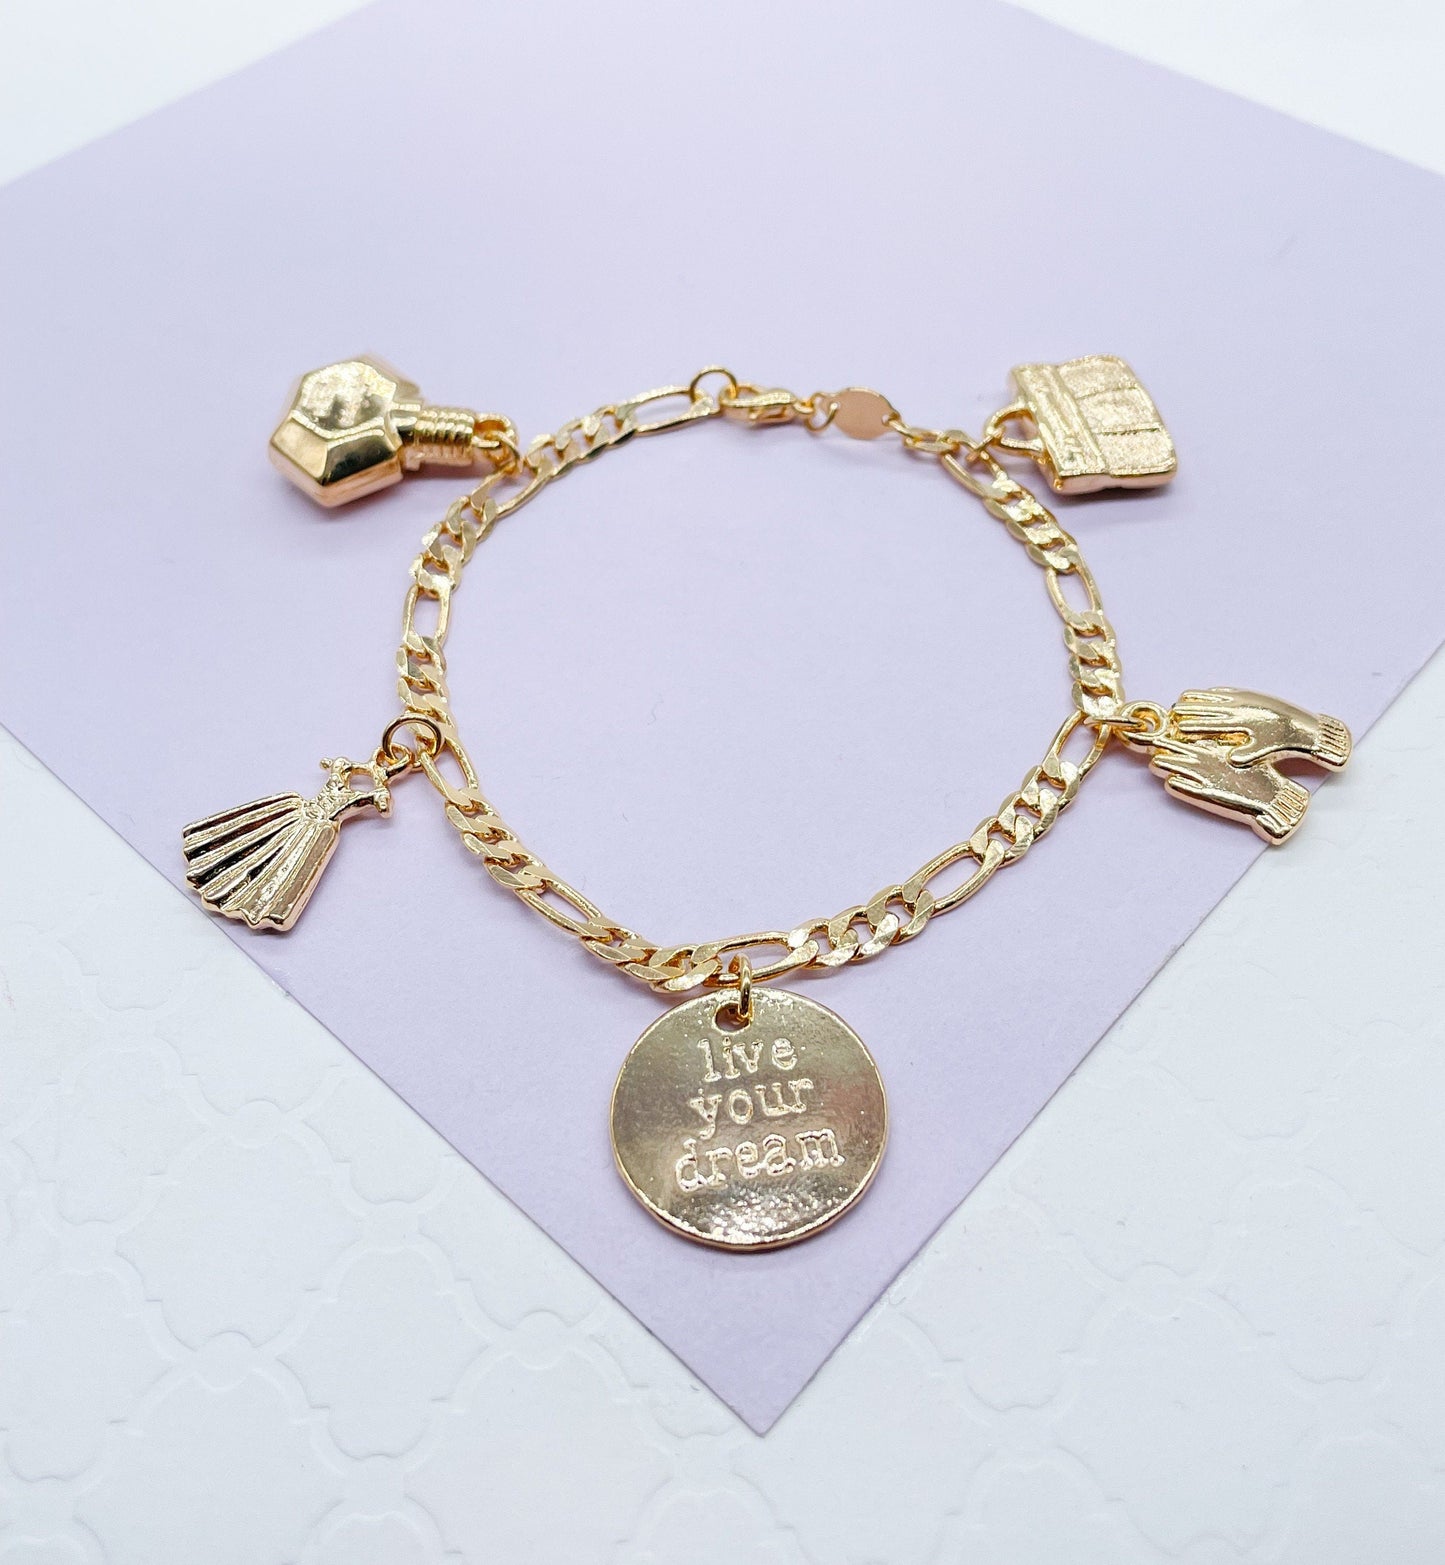 18k Gold Filled Figaro Link Charm Bracelet With Girly and Encouragement Charms